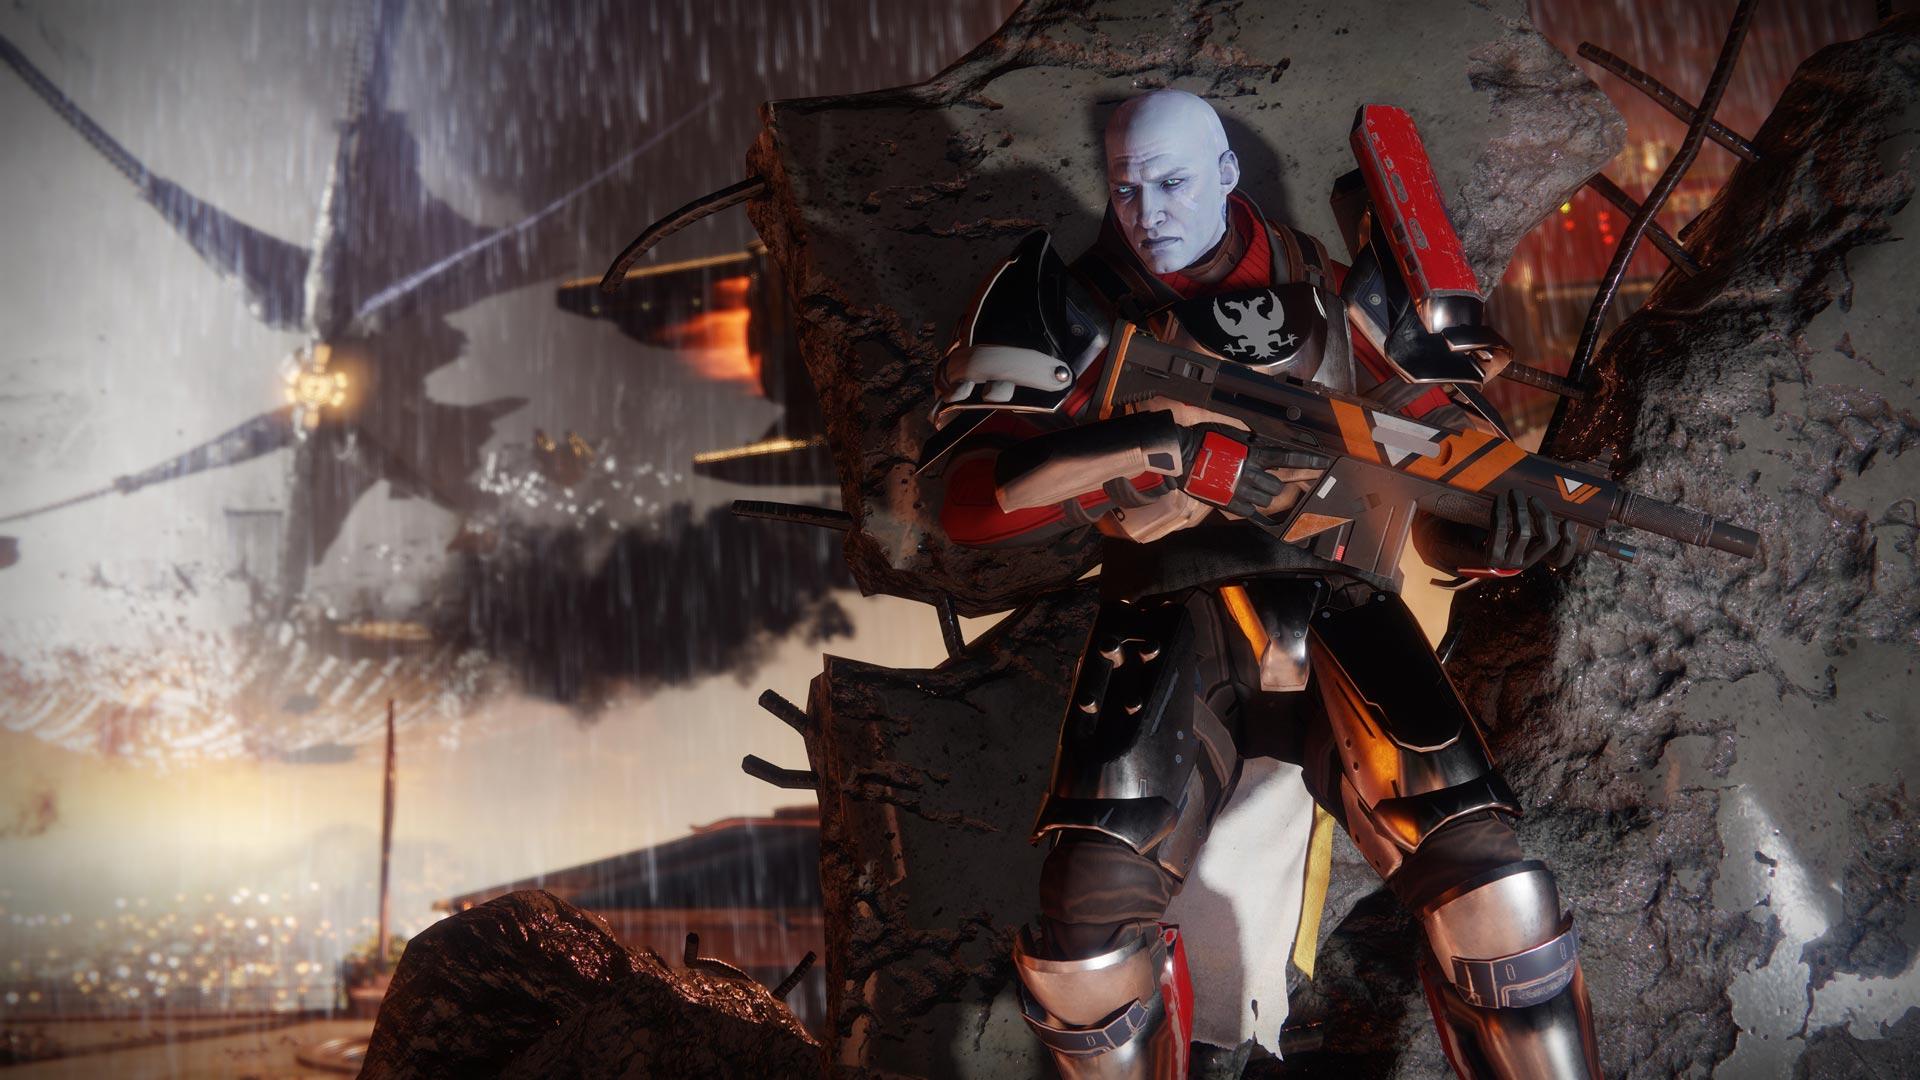 Destiny 2 Third DLC Will Introduce A New Play Mode Offering A New